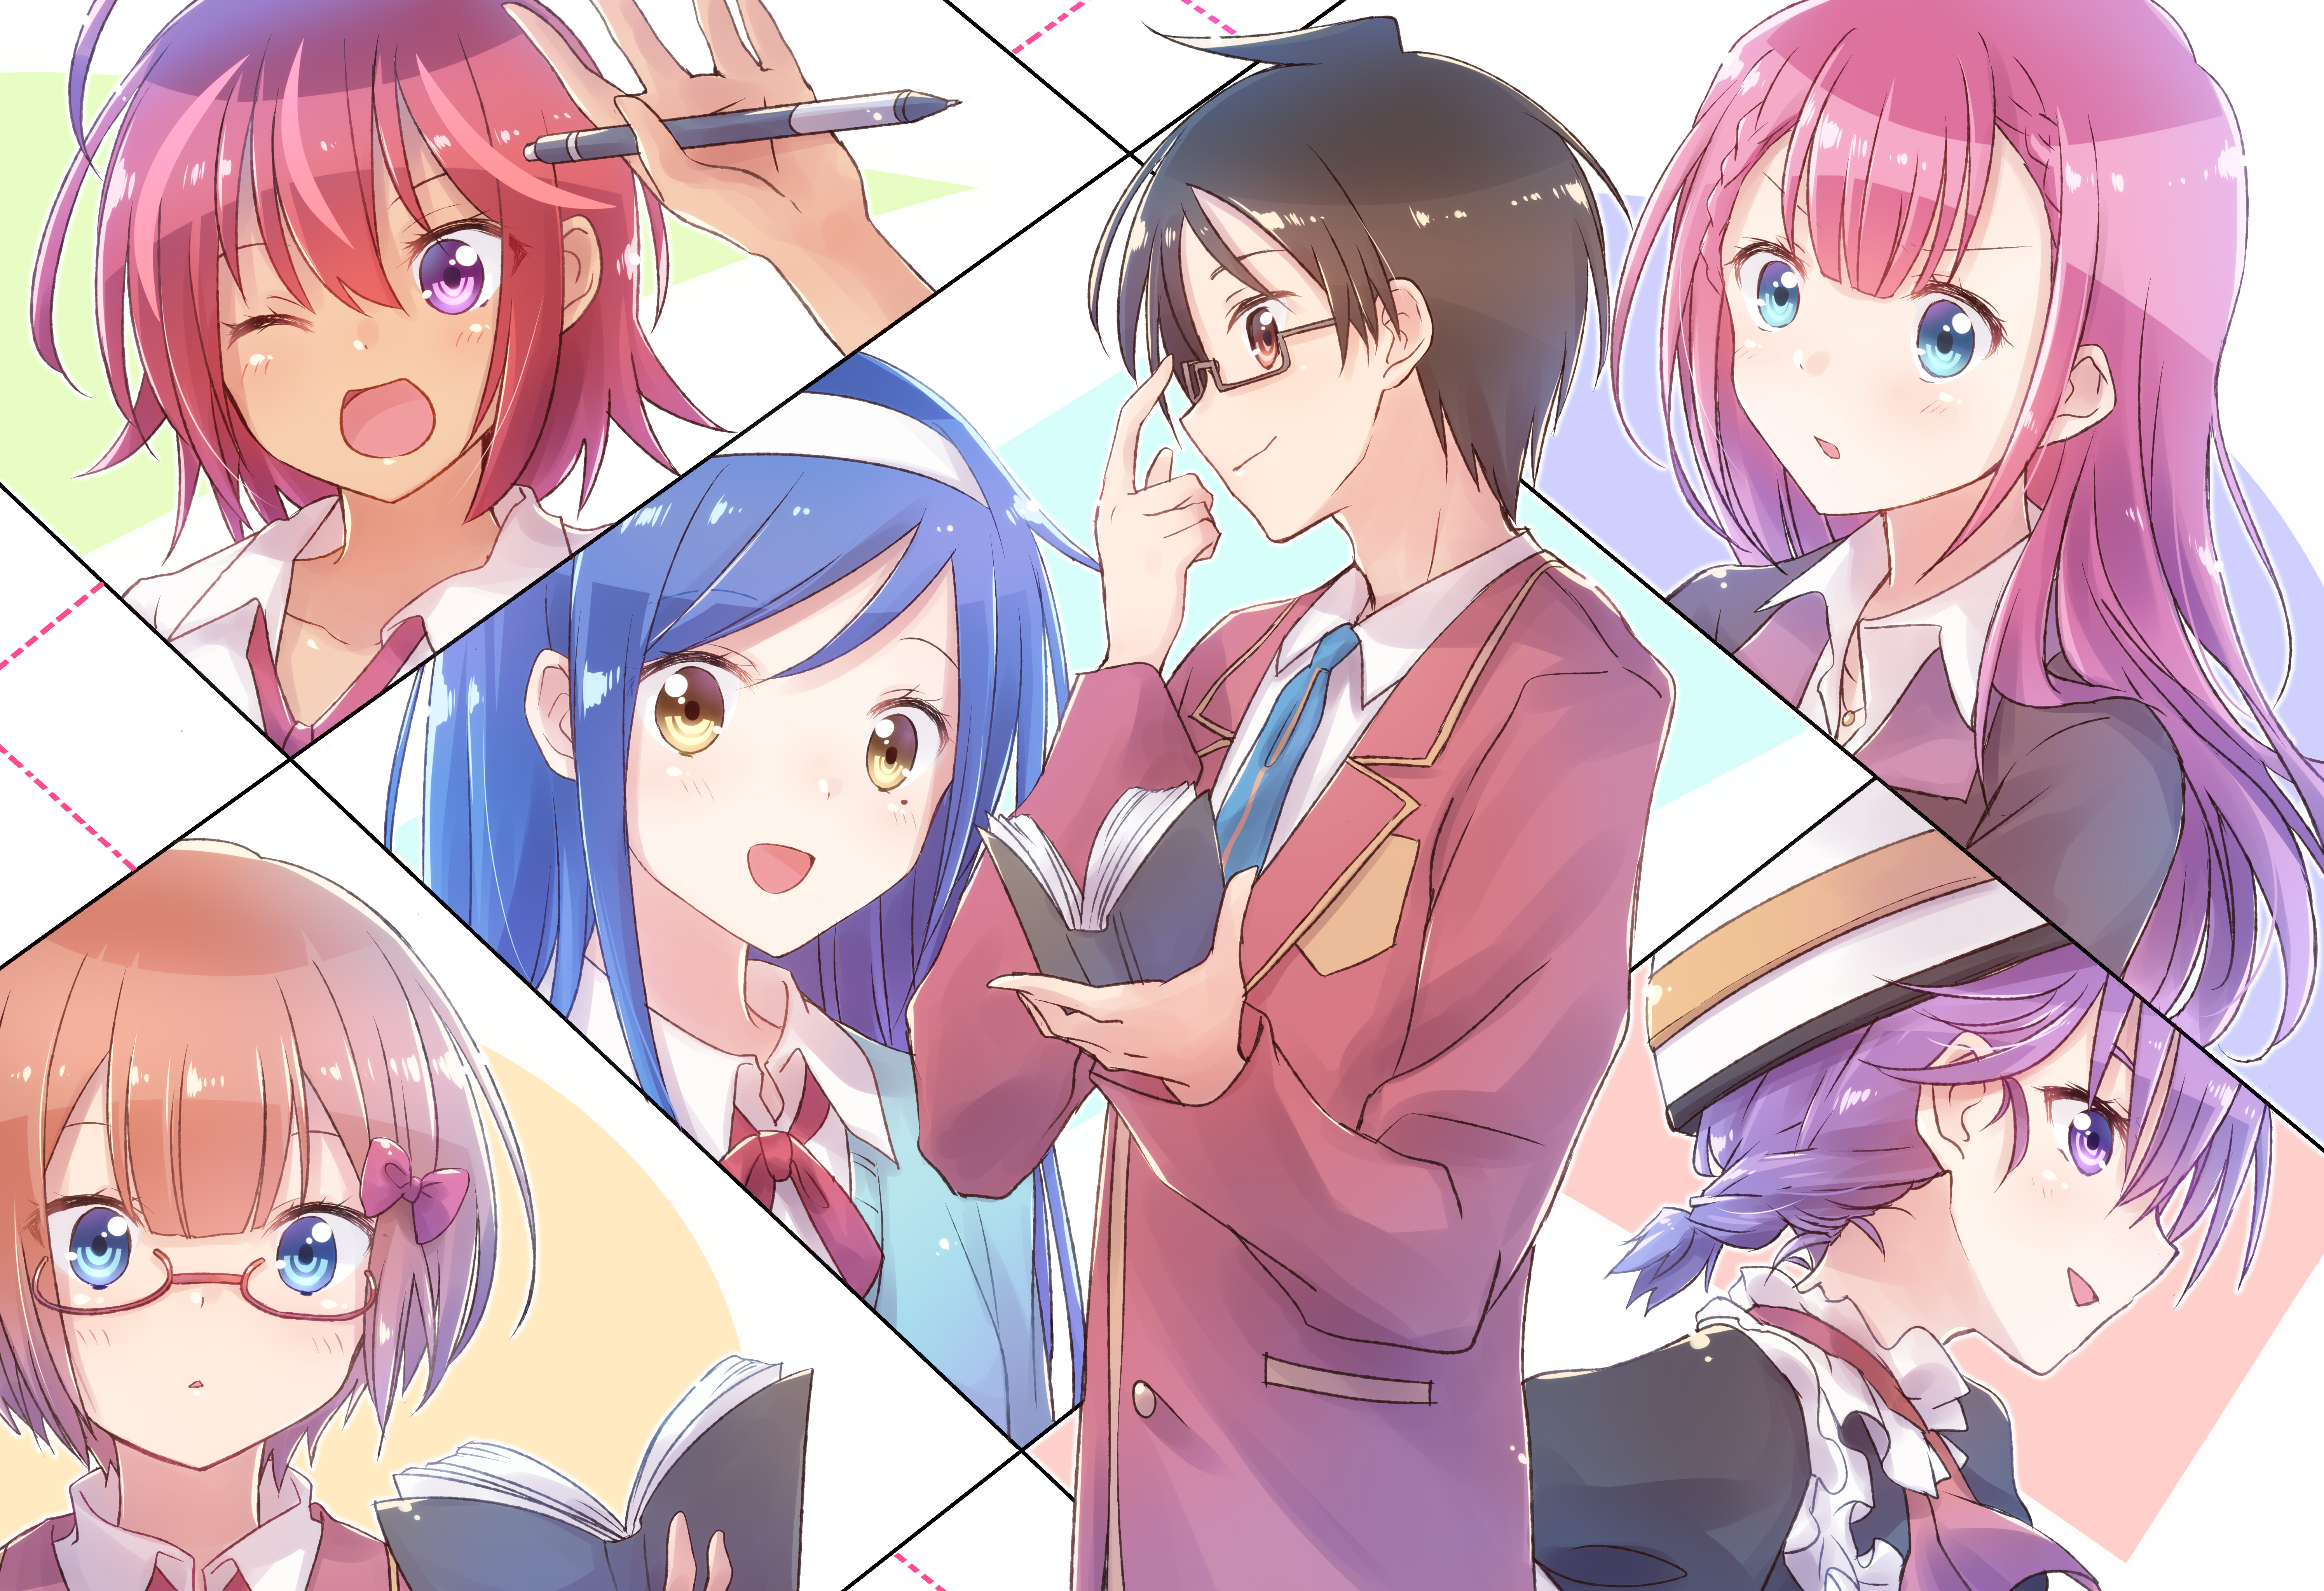 We Never Learn 4k Ultra HD Wallpaper by にゃー